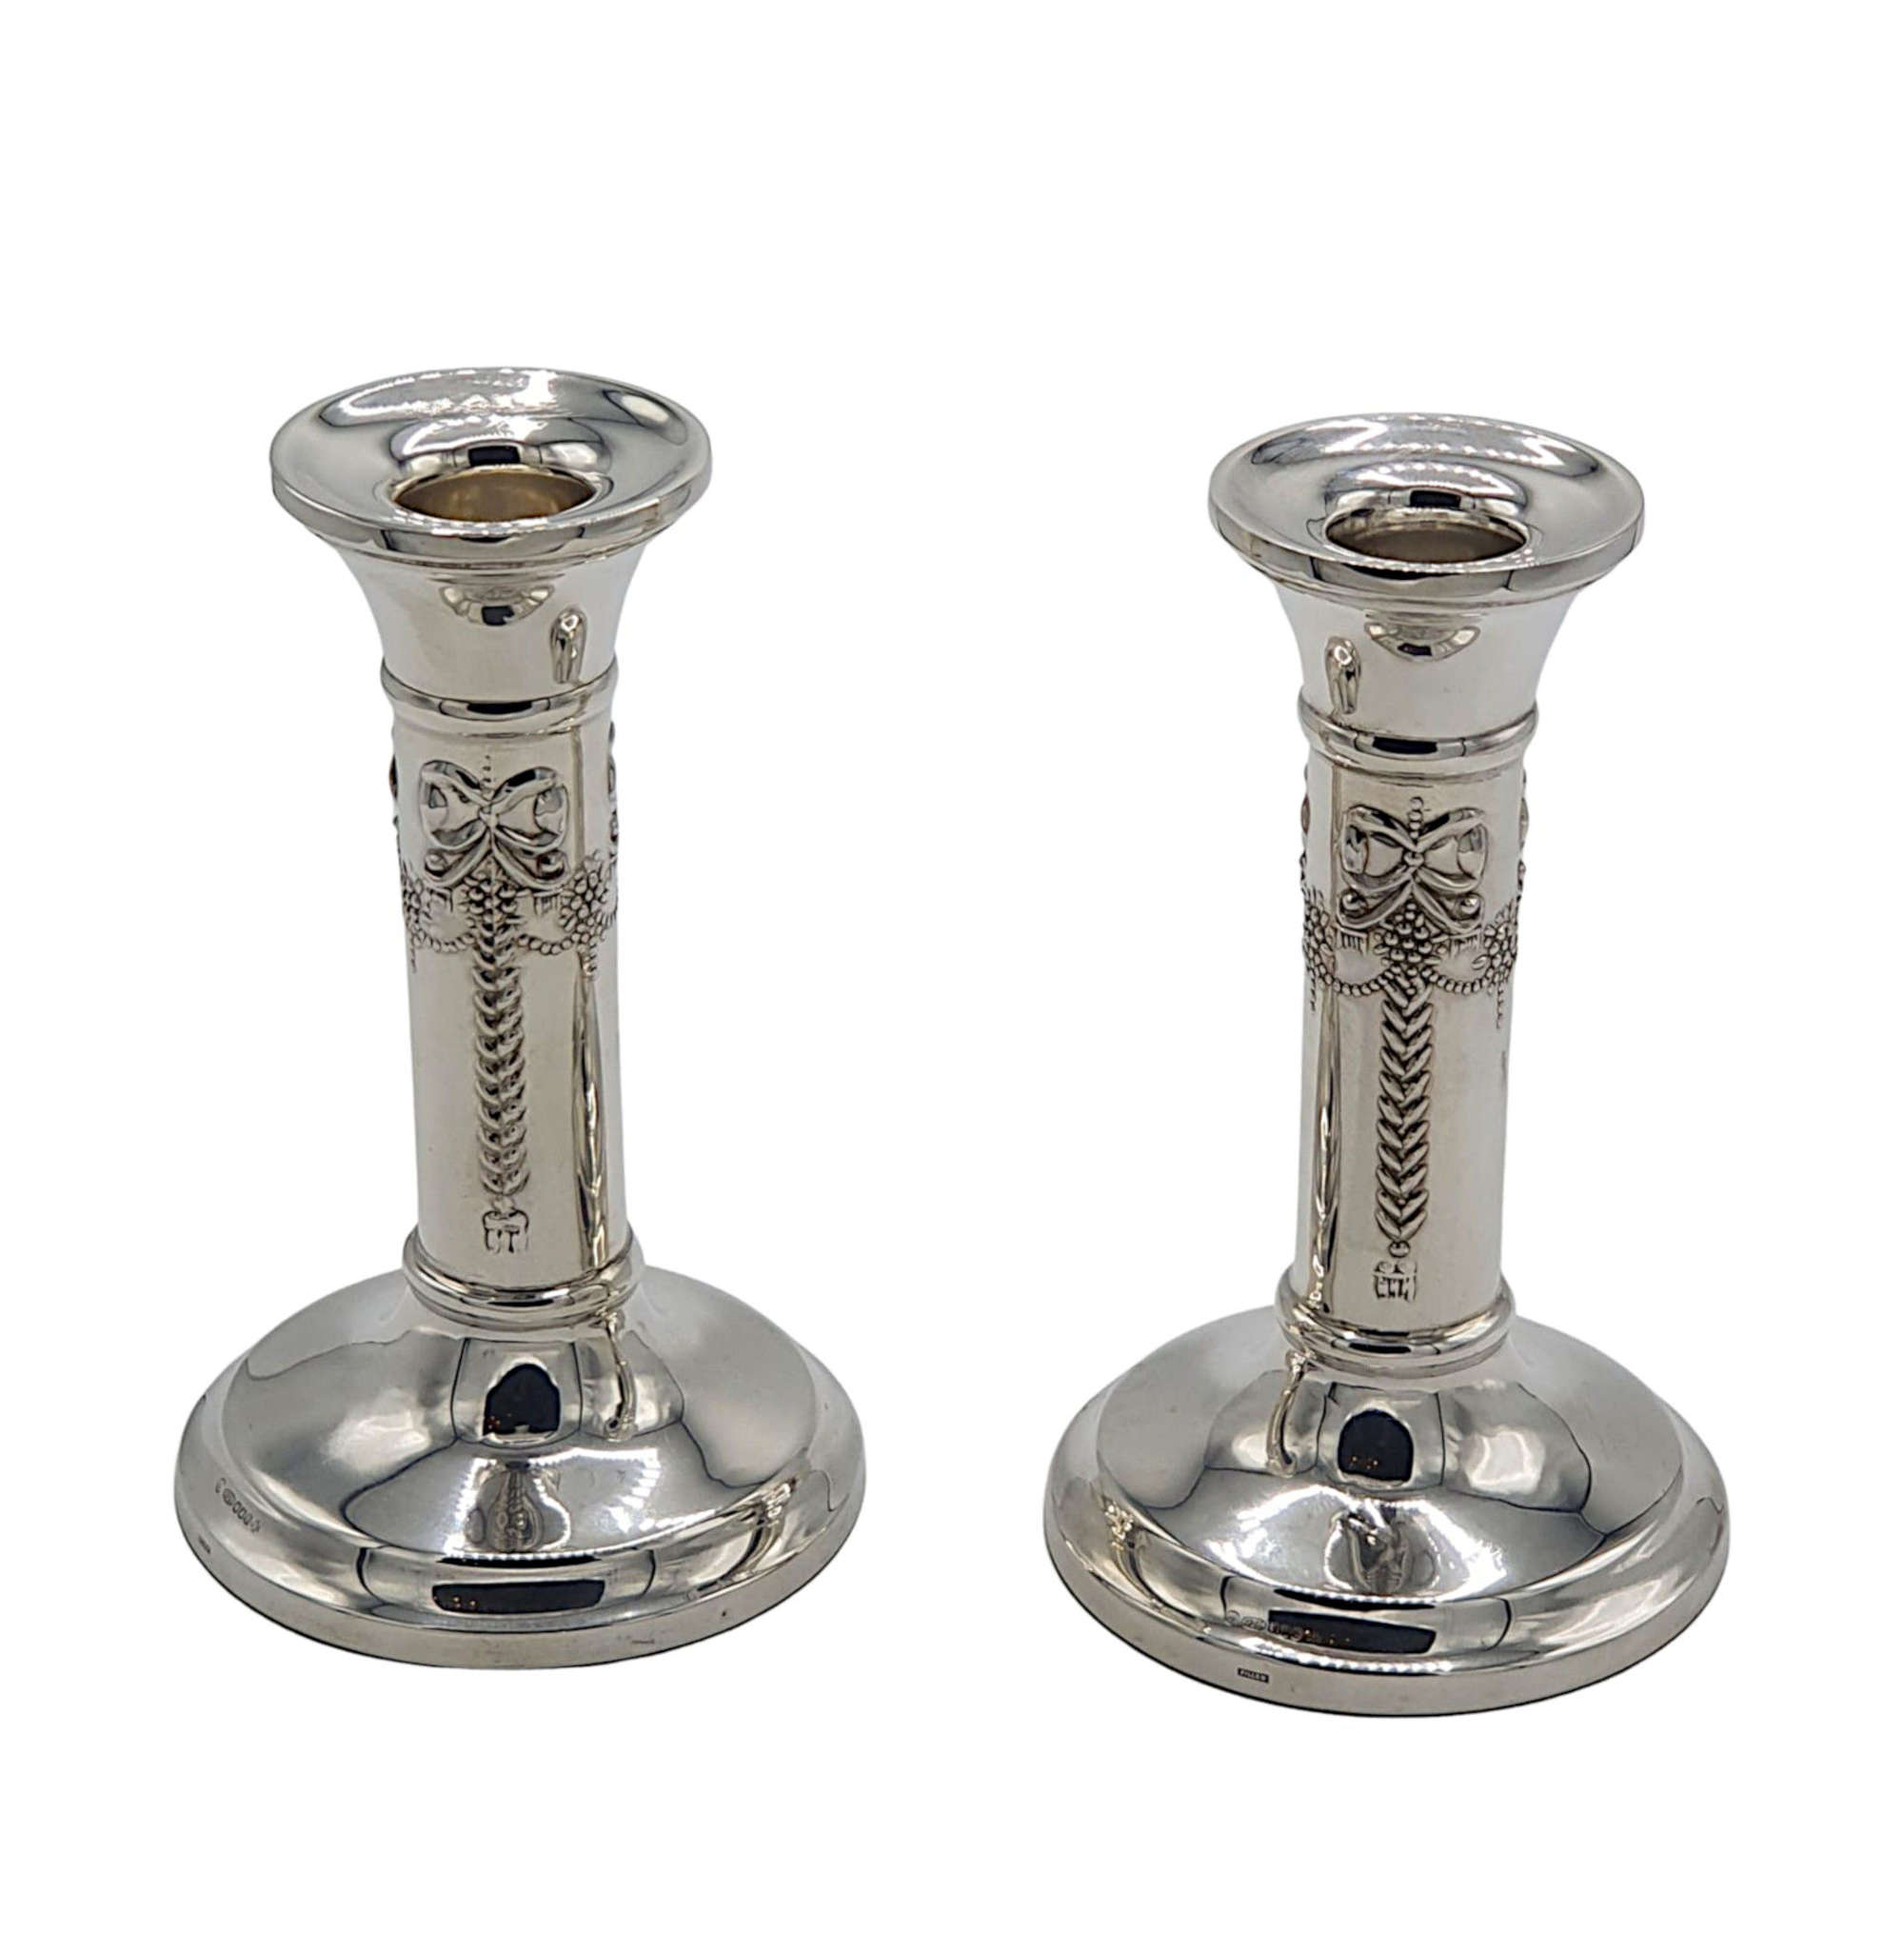 A Lovely Pair Of 20th Century Sterling Silver Vintage Candlesticks After Adams